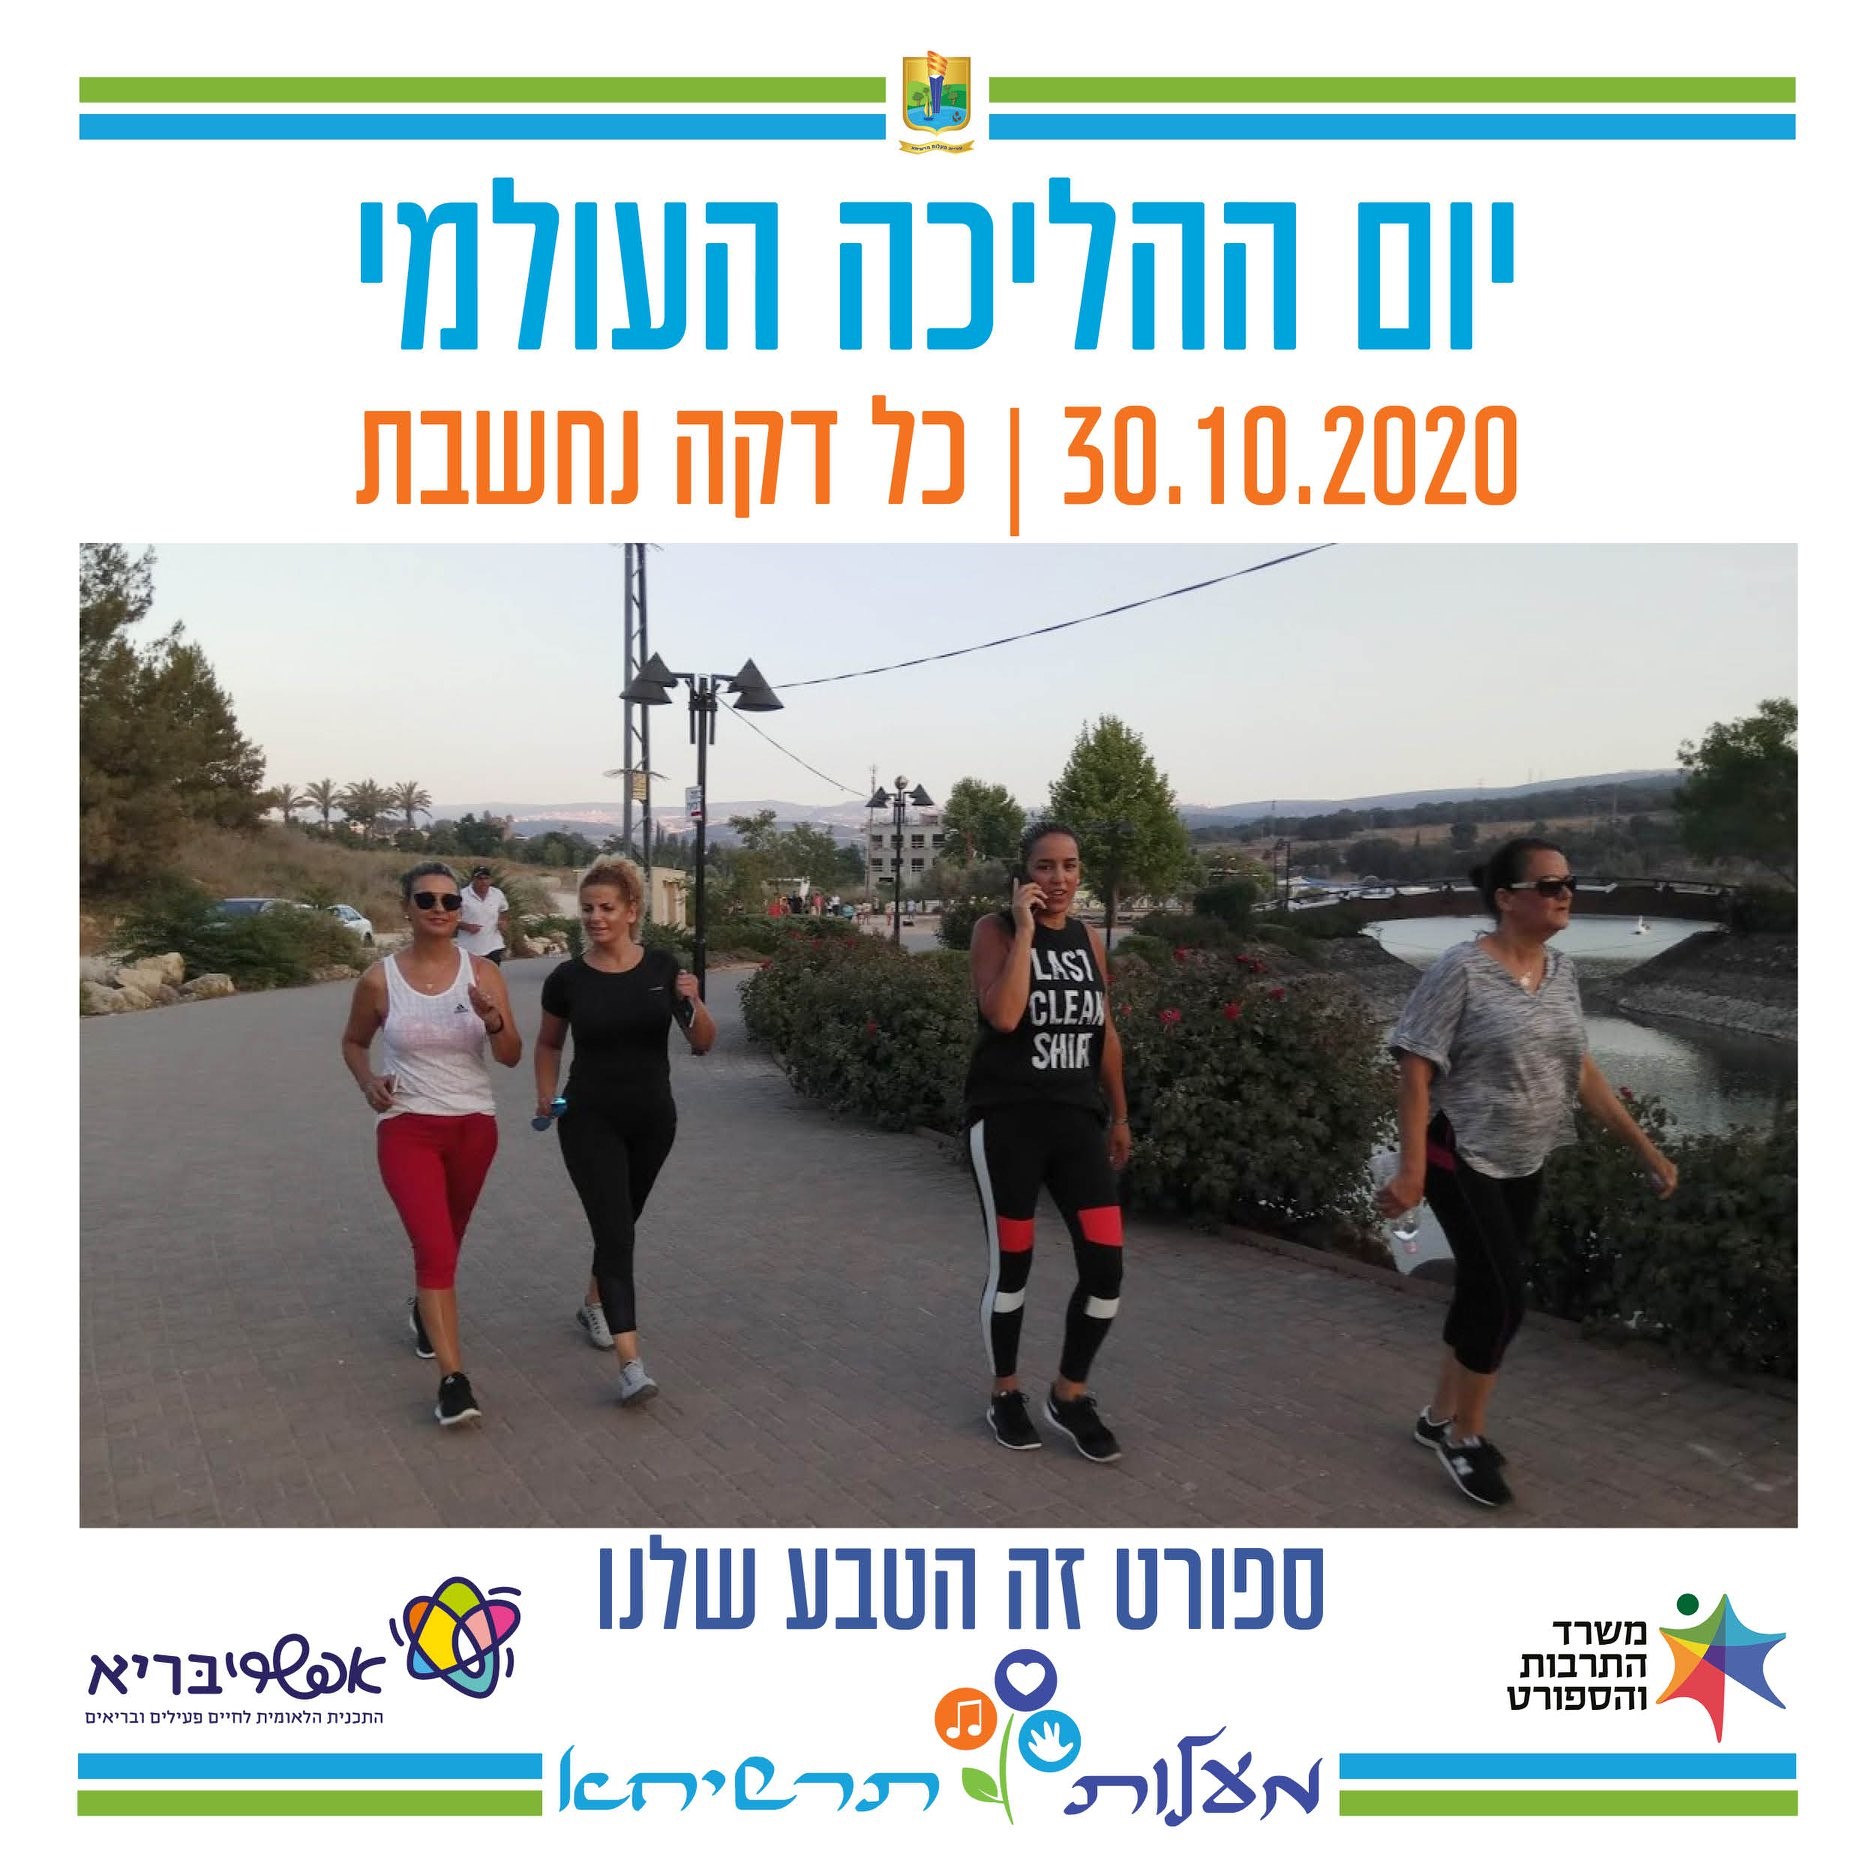 world walking day 30.10 2020 every minute counts, sport is in our nature, ma'alot tarshiha, efashribari the national program for active and healthy living, the ministry of culture and sports